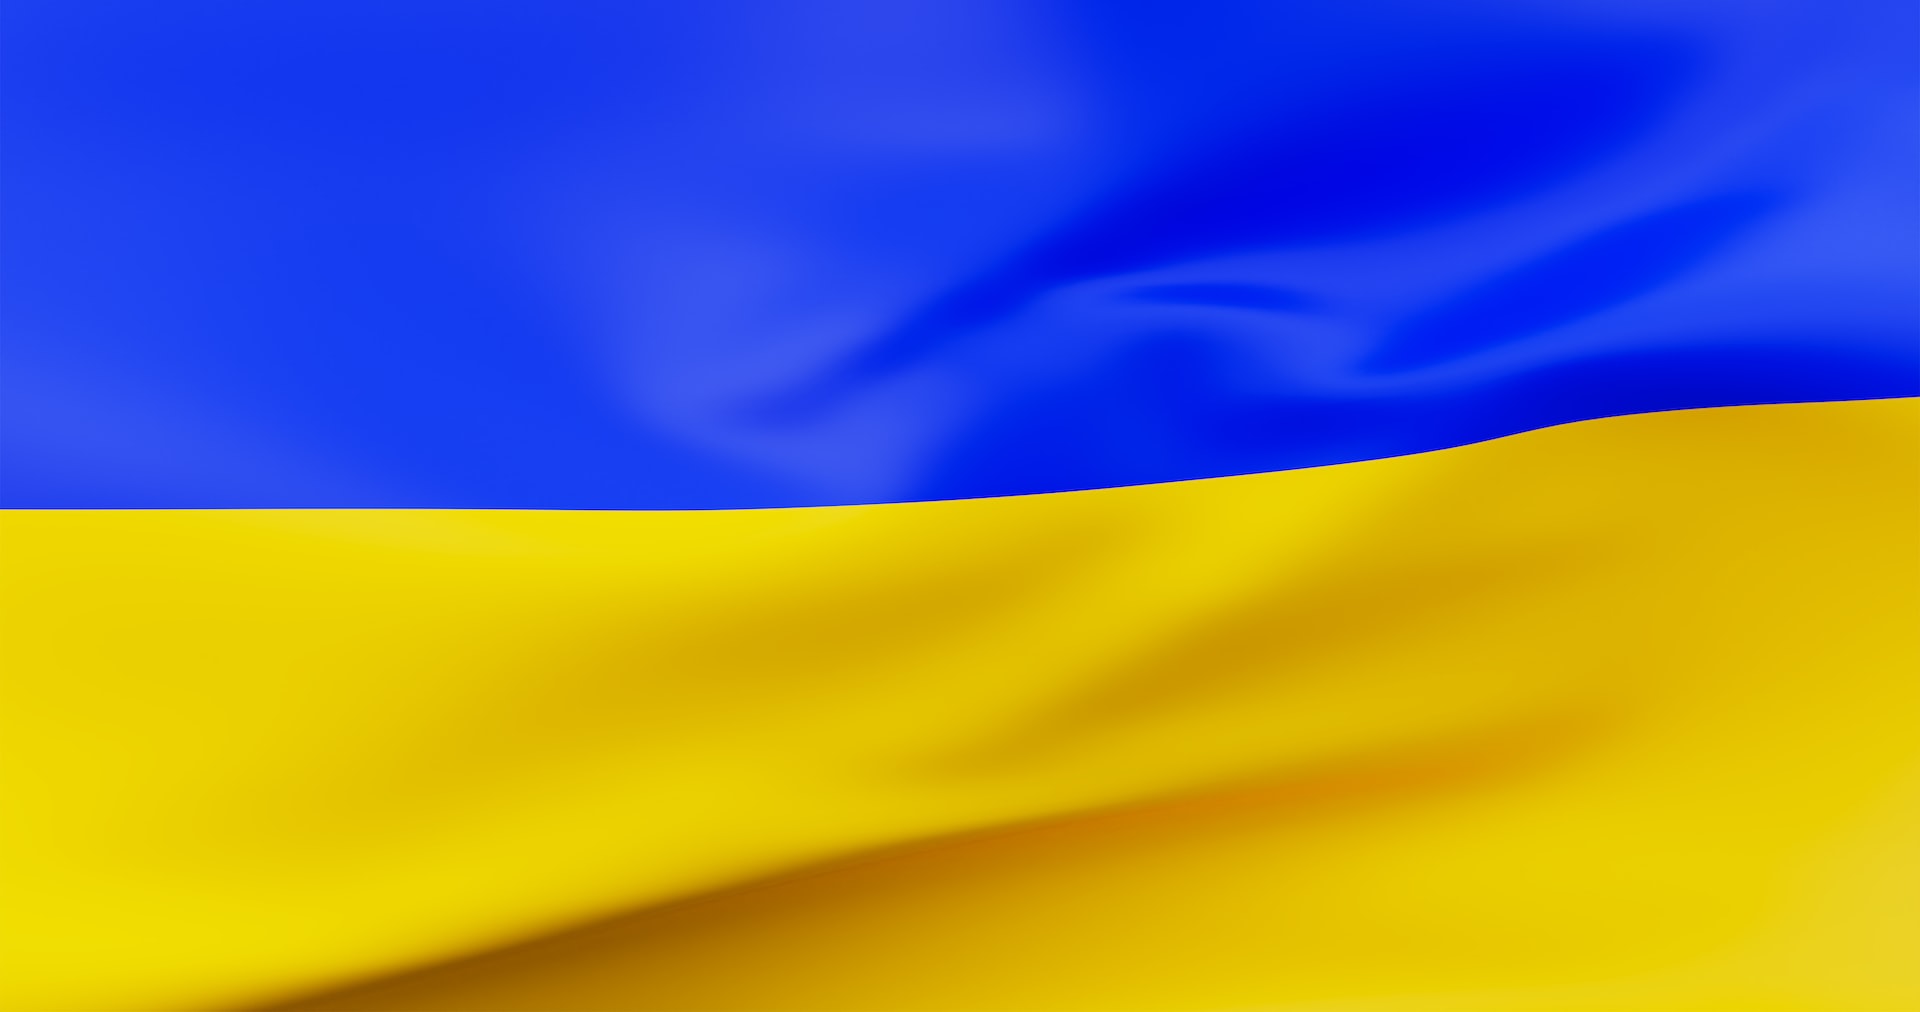 Featured image for “Ukrainian Relief Fund”